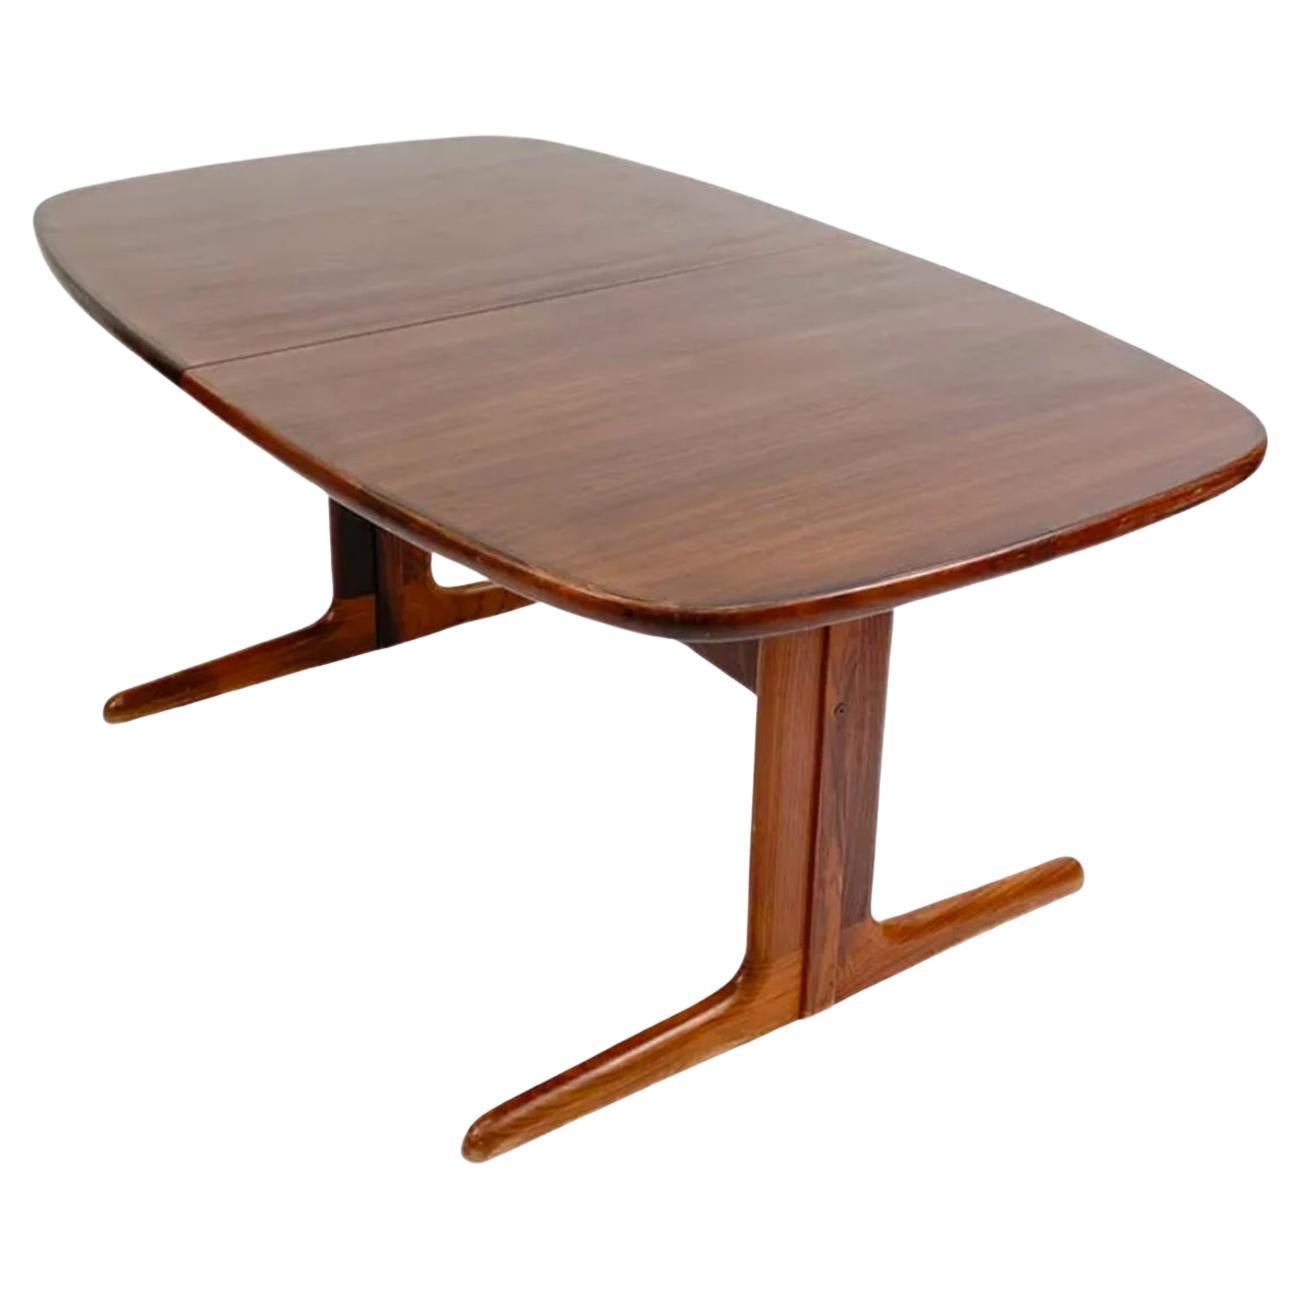 Mid century rosewood rounded Danish Modern extension dining table with (2) leaves. This table has Solid rosewood wood legs. This table is in beautiful condition with Dark black and reddish rosewood tones very great Table. This table Comes with (2)